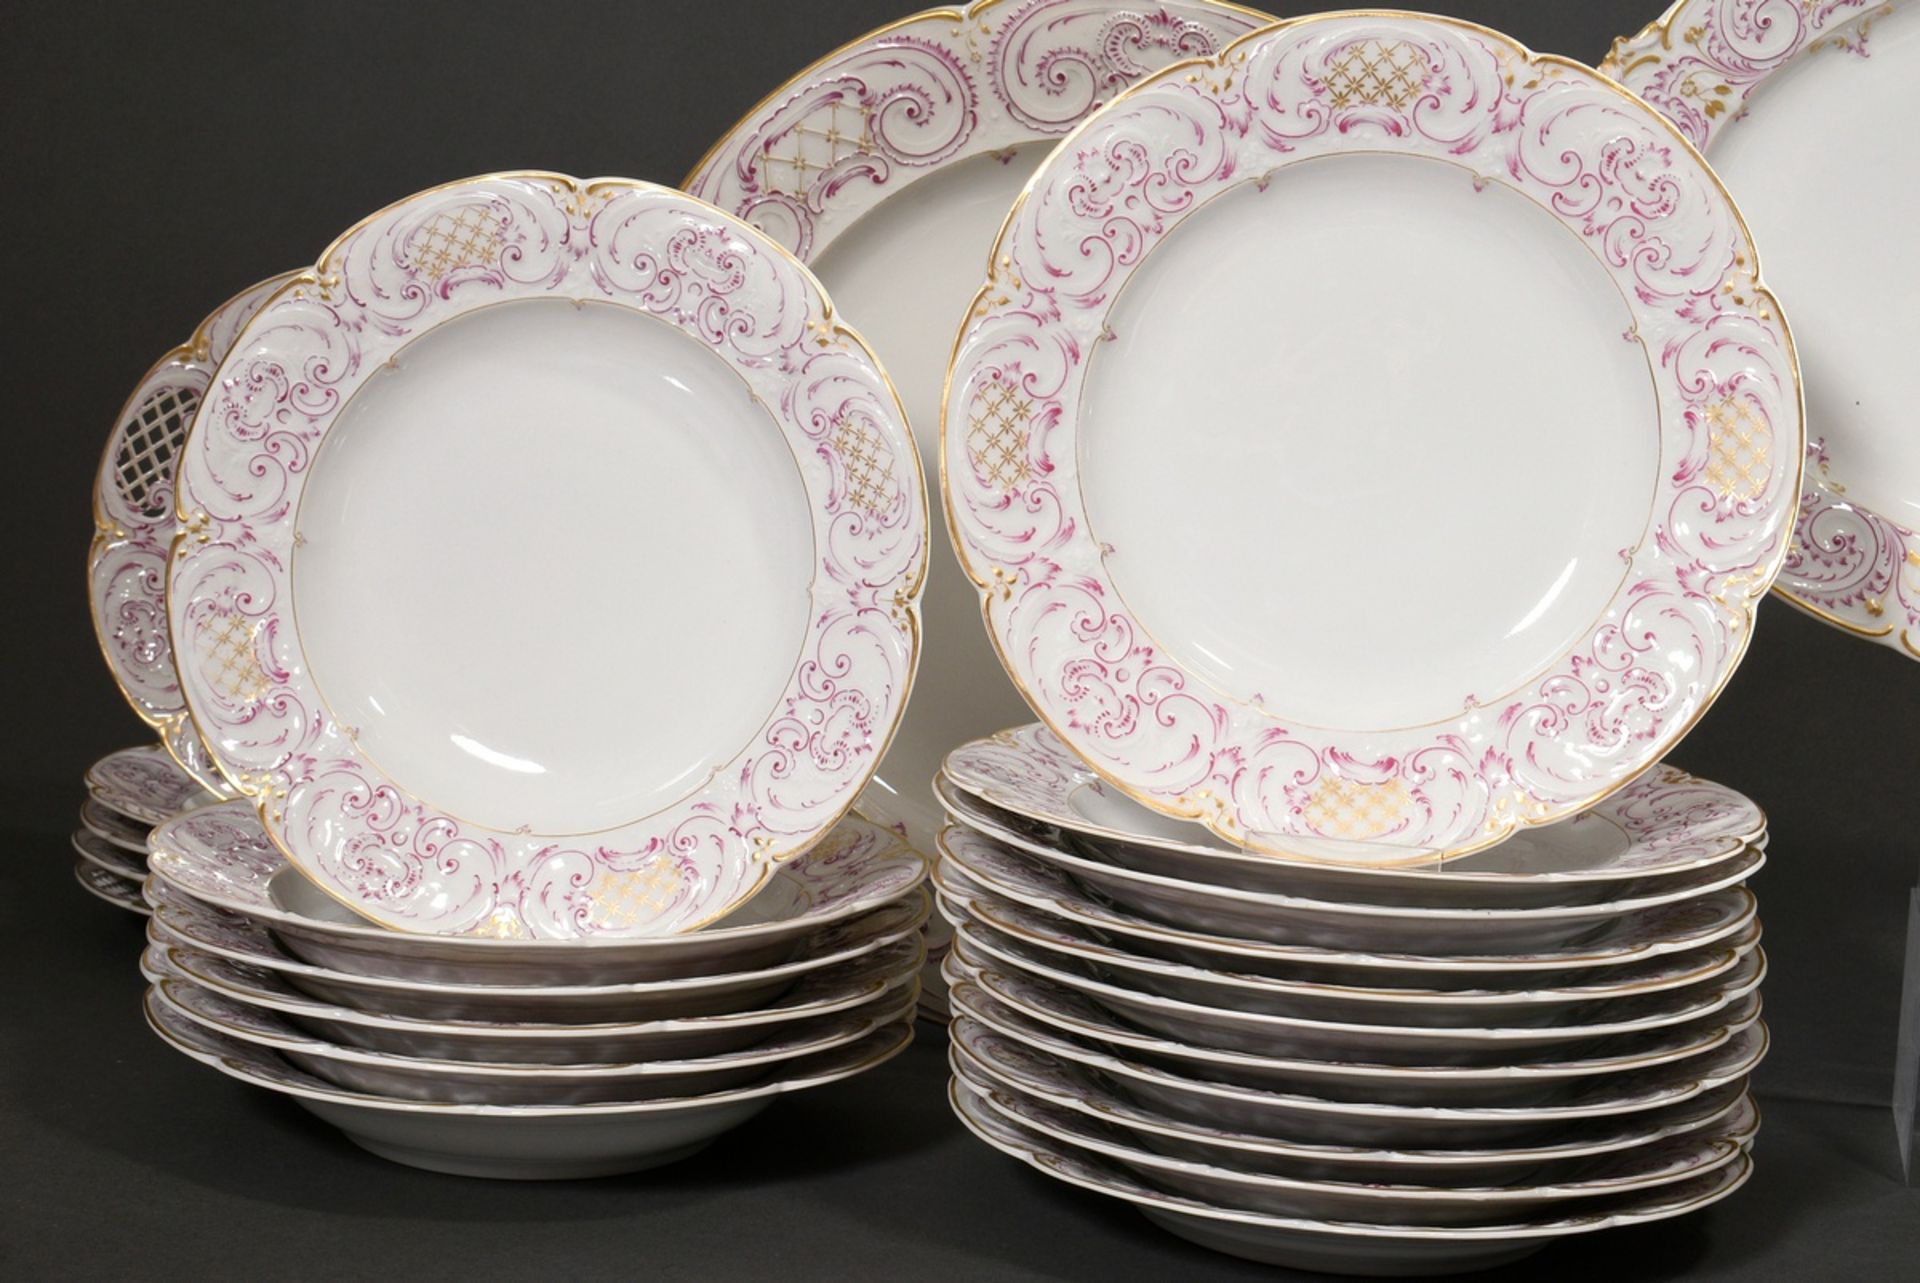 69 Pieces KPM dinner service in Rococo form with purple and gold staffage, red imperial orb mark, c - Image 22 of 22